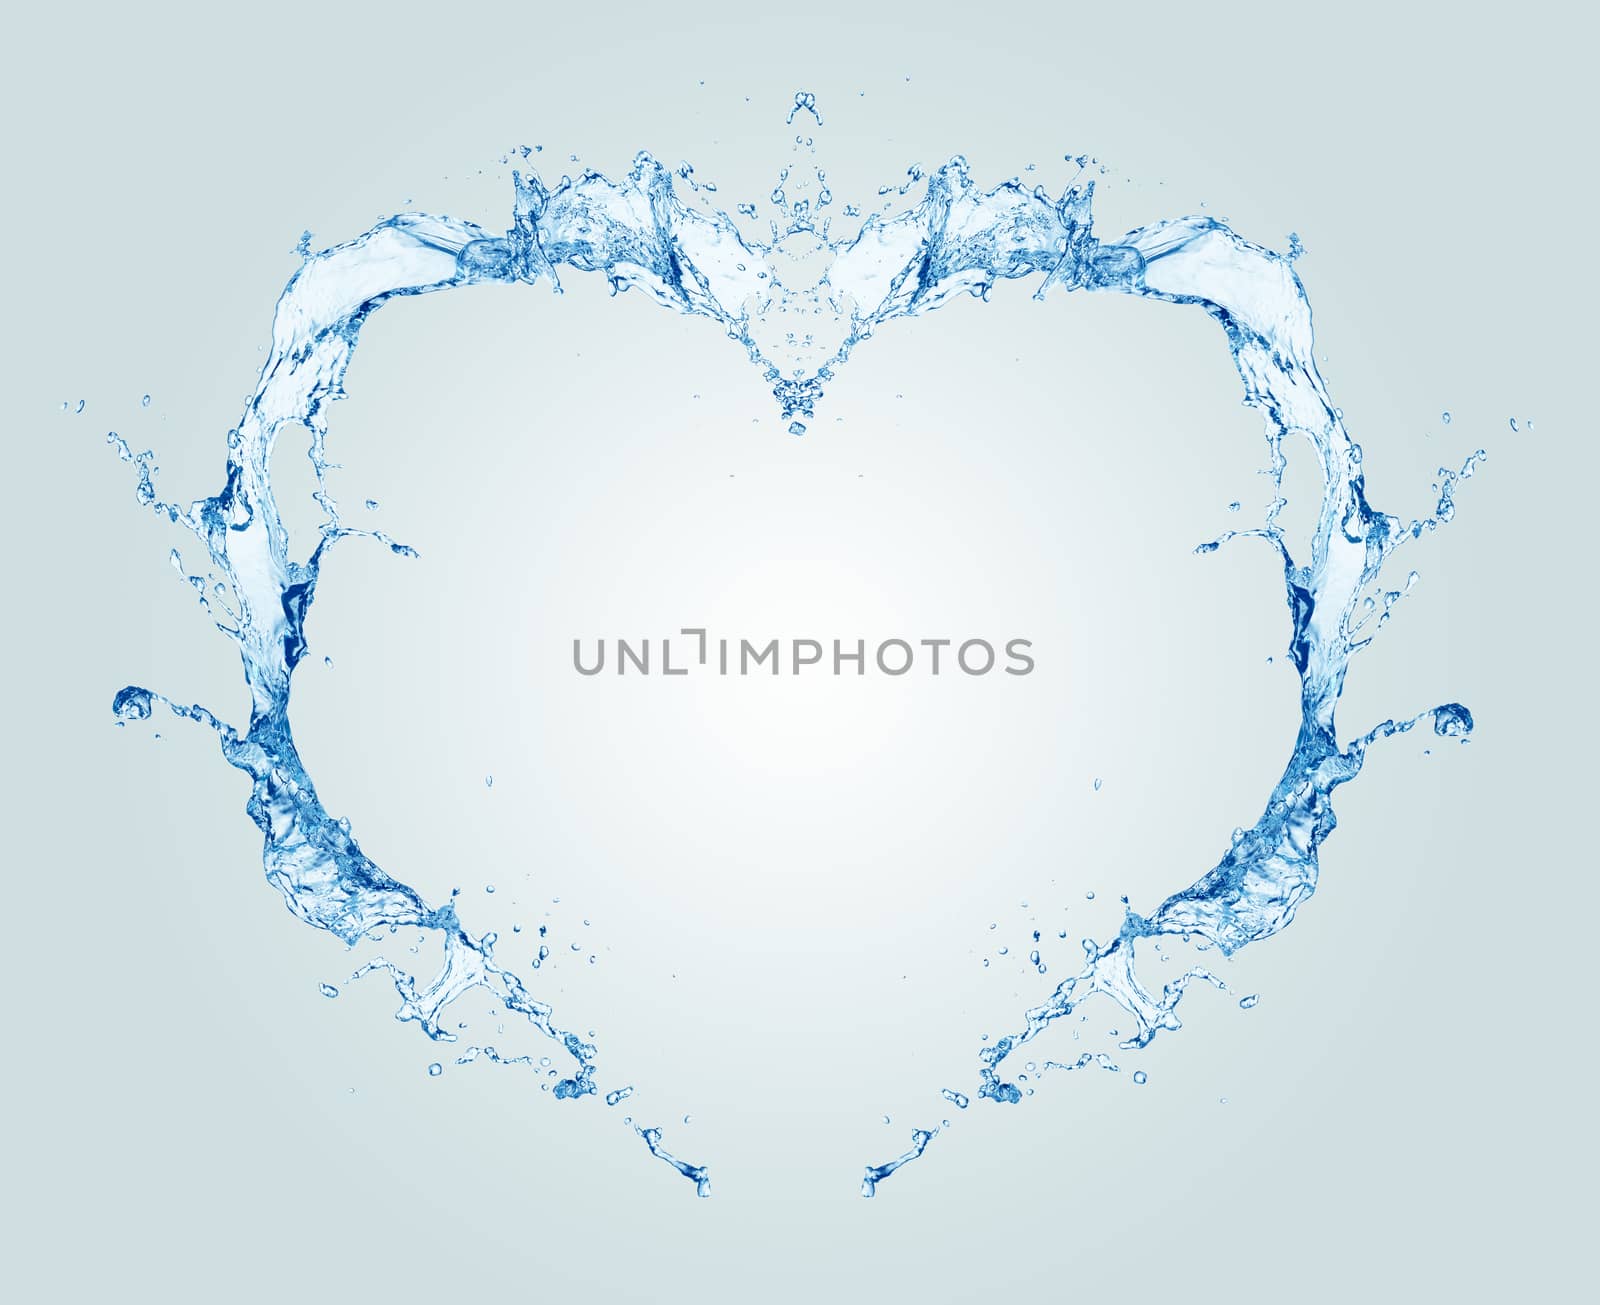 Water heart isolated on light blue background